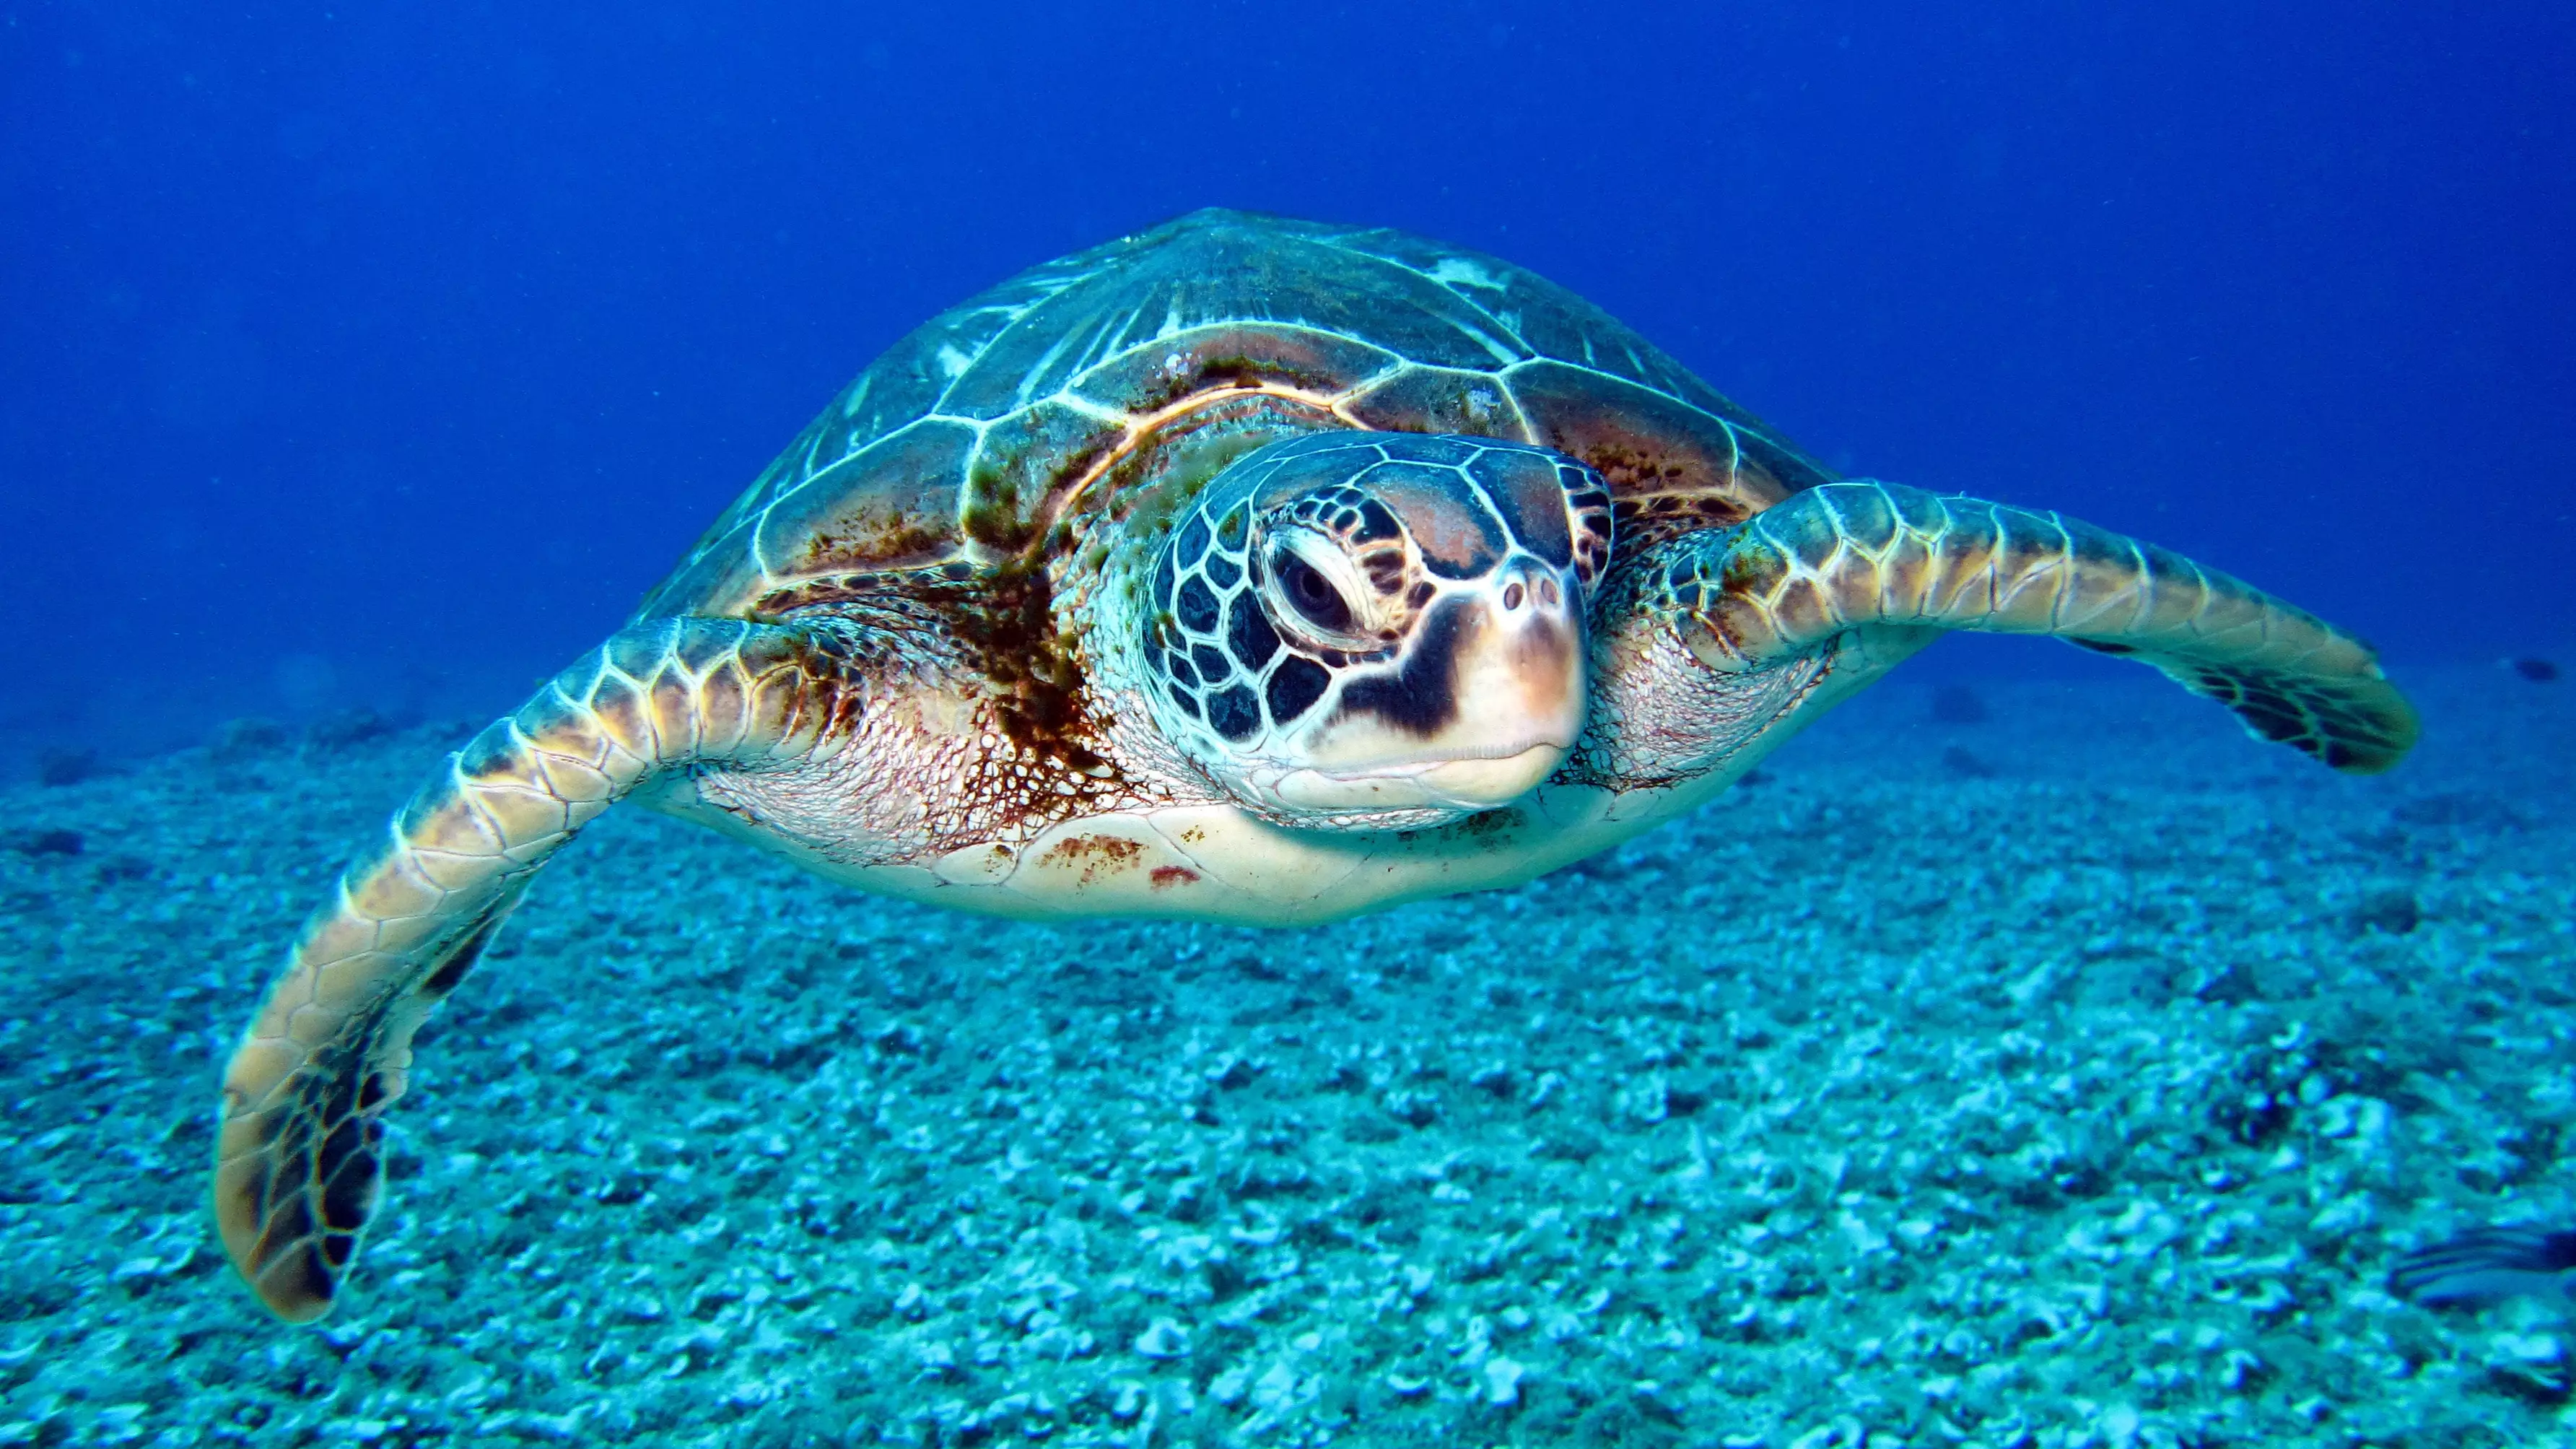 Luxury Hotel In The Maldives Is Hiring Someone To Look After Its Turtles